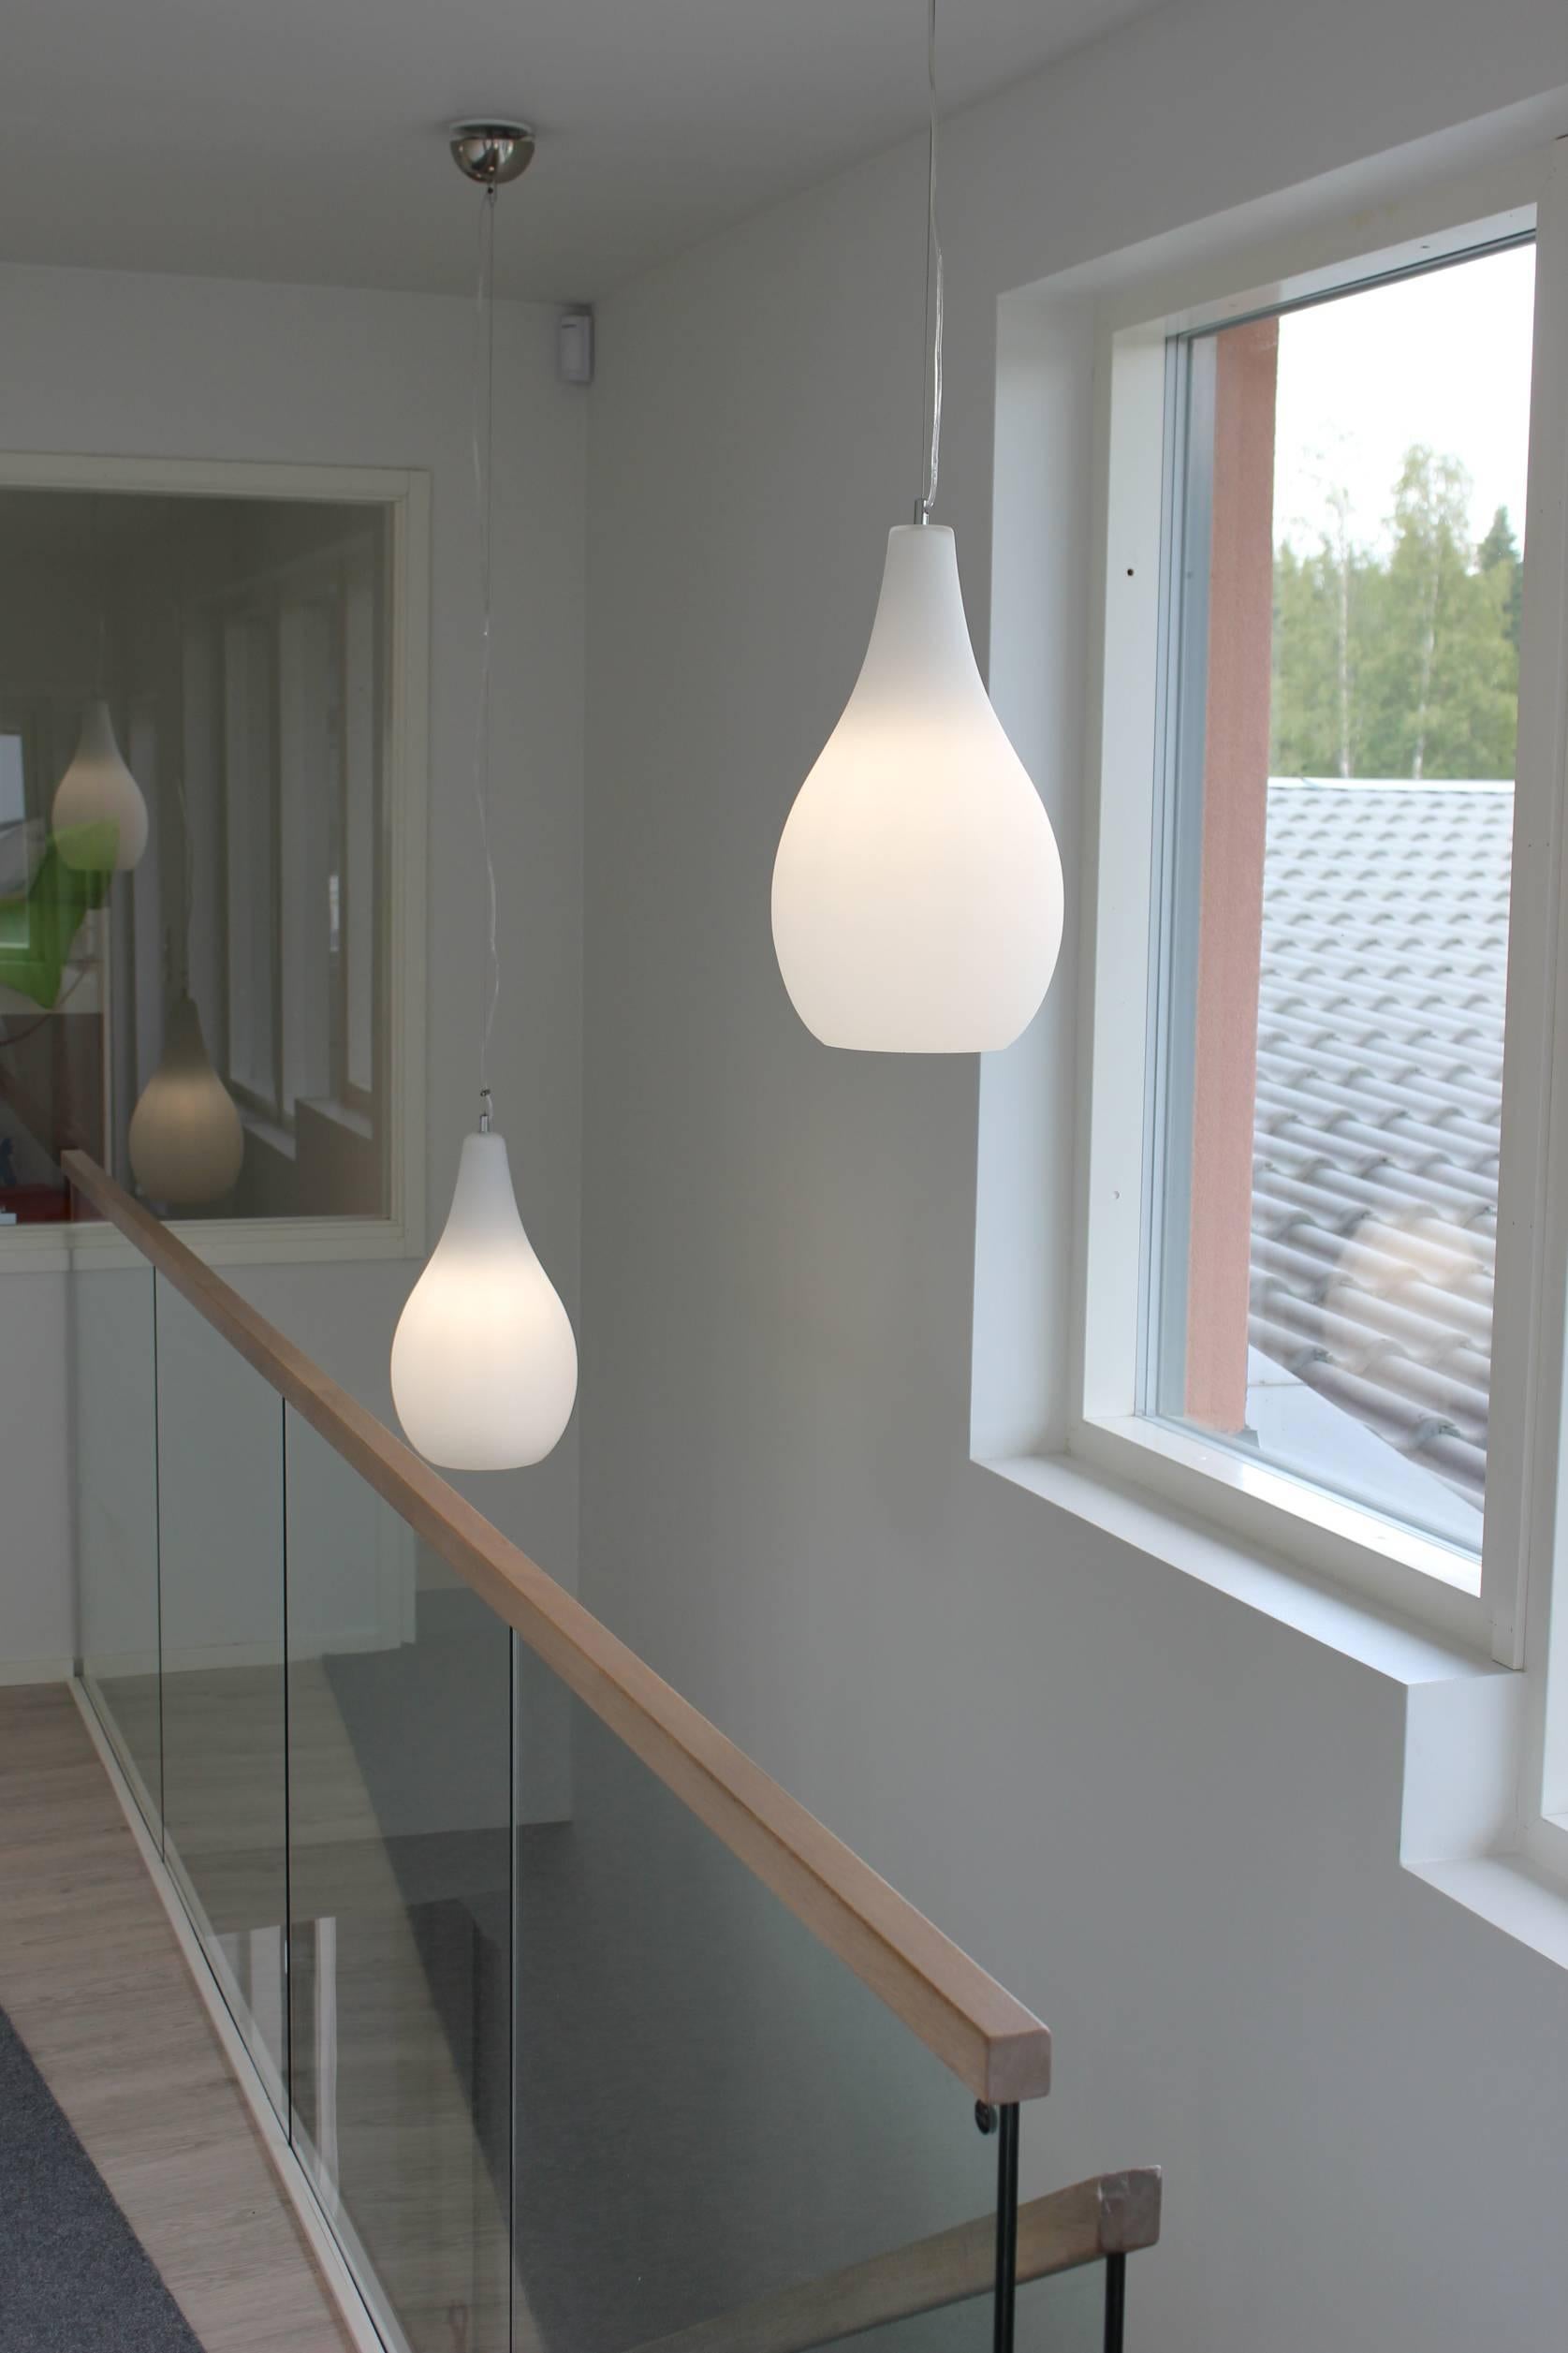 Pair of Large 'Pisara' Opaline Glass Pendant Lamps by Innolux Oy, Finland. The Pisara is a stylish and high-quality pendant executed in high-quality blown opaline glass with metal suspension wire. A quintessentially Finnish design in the tradition